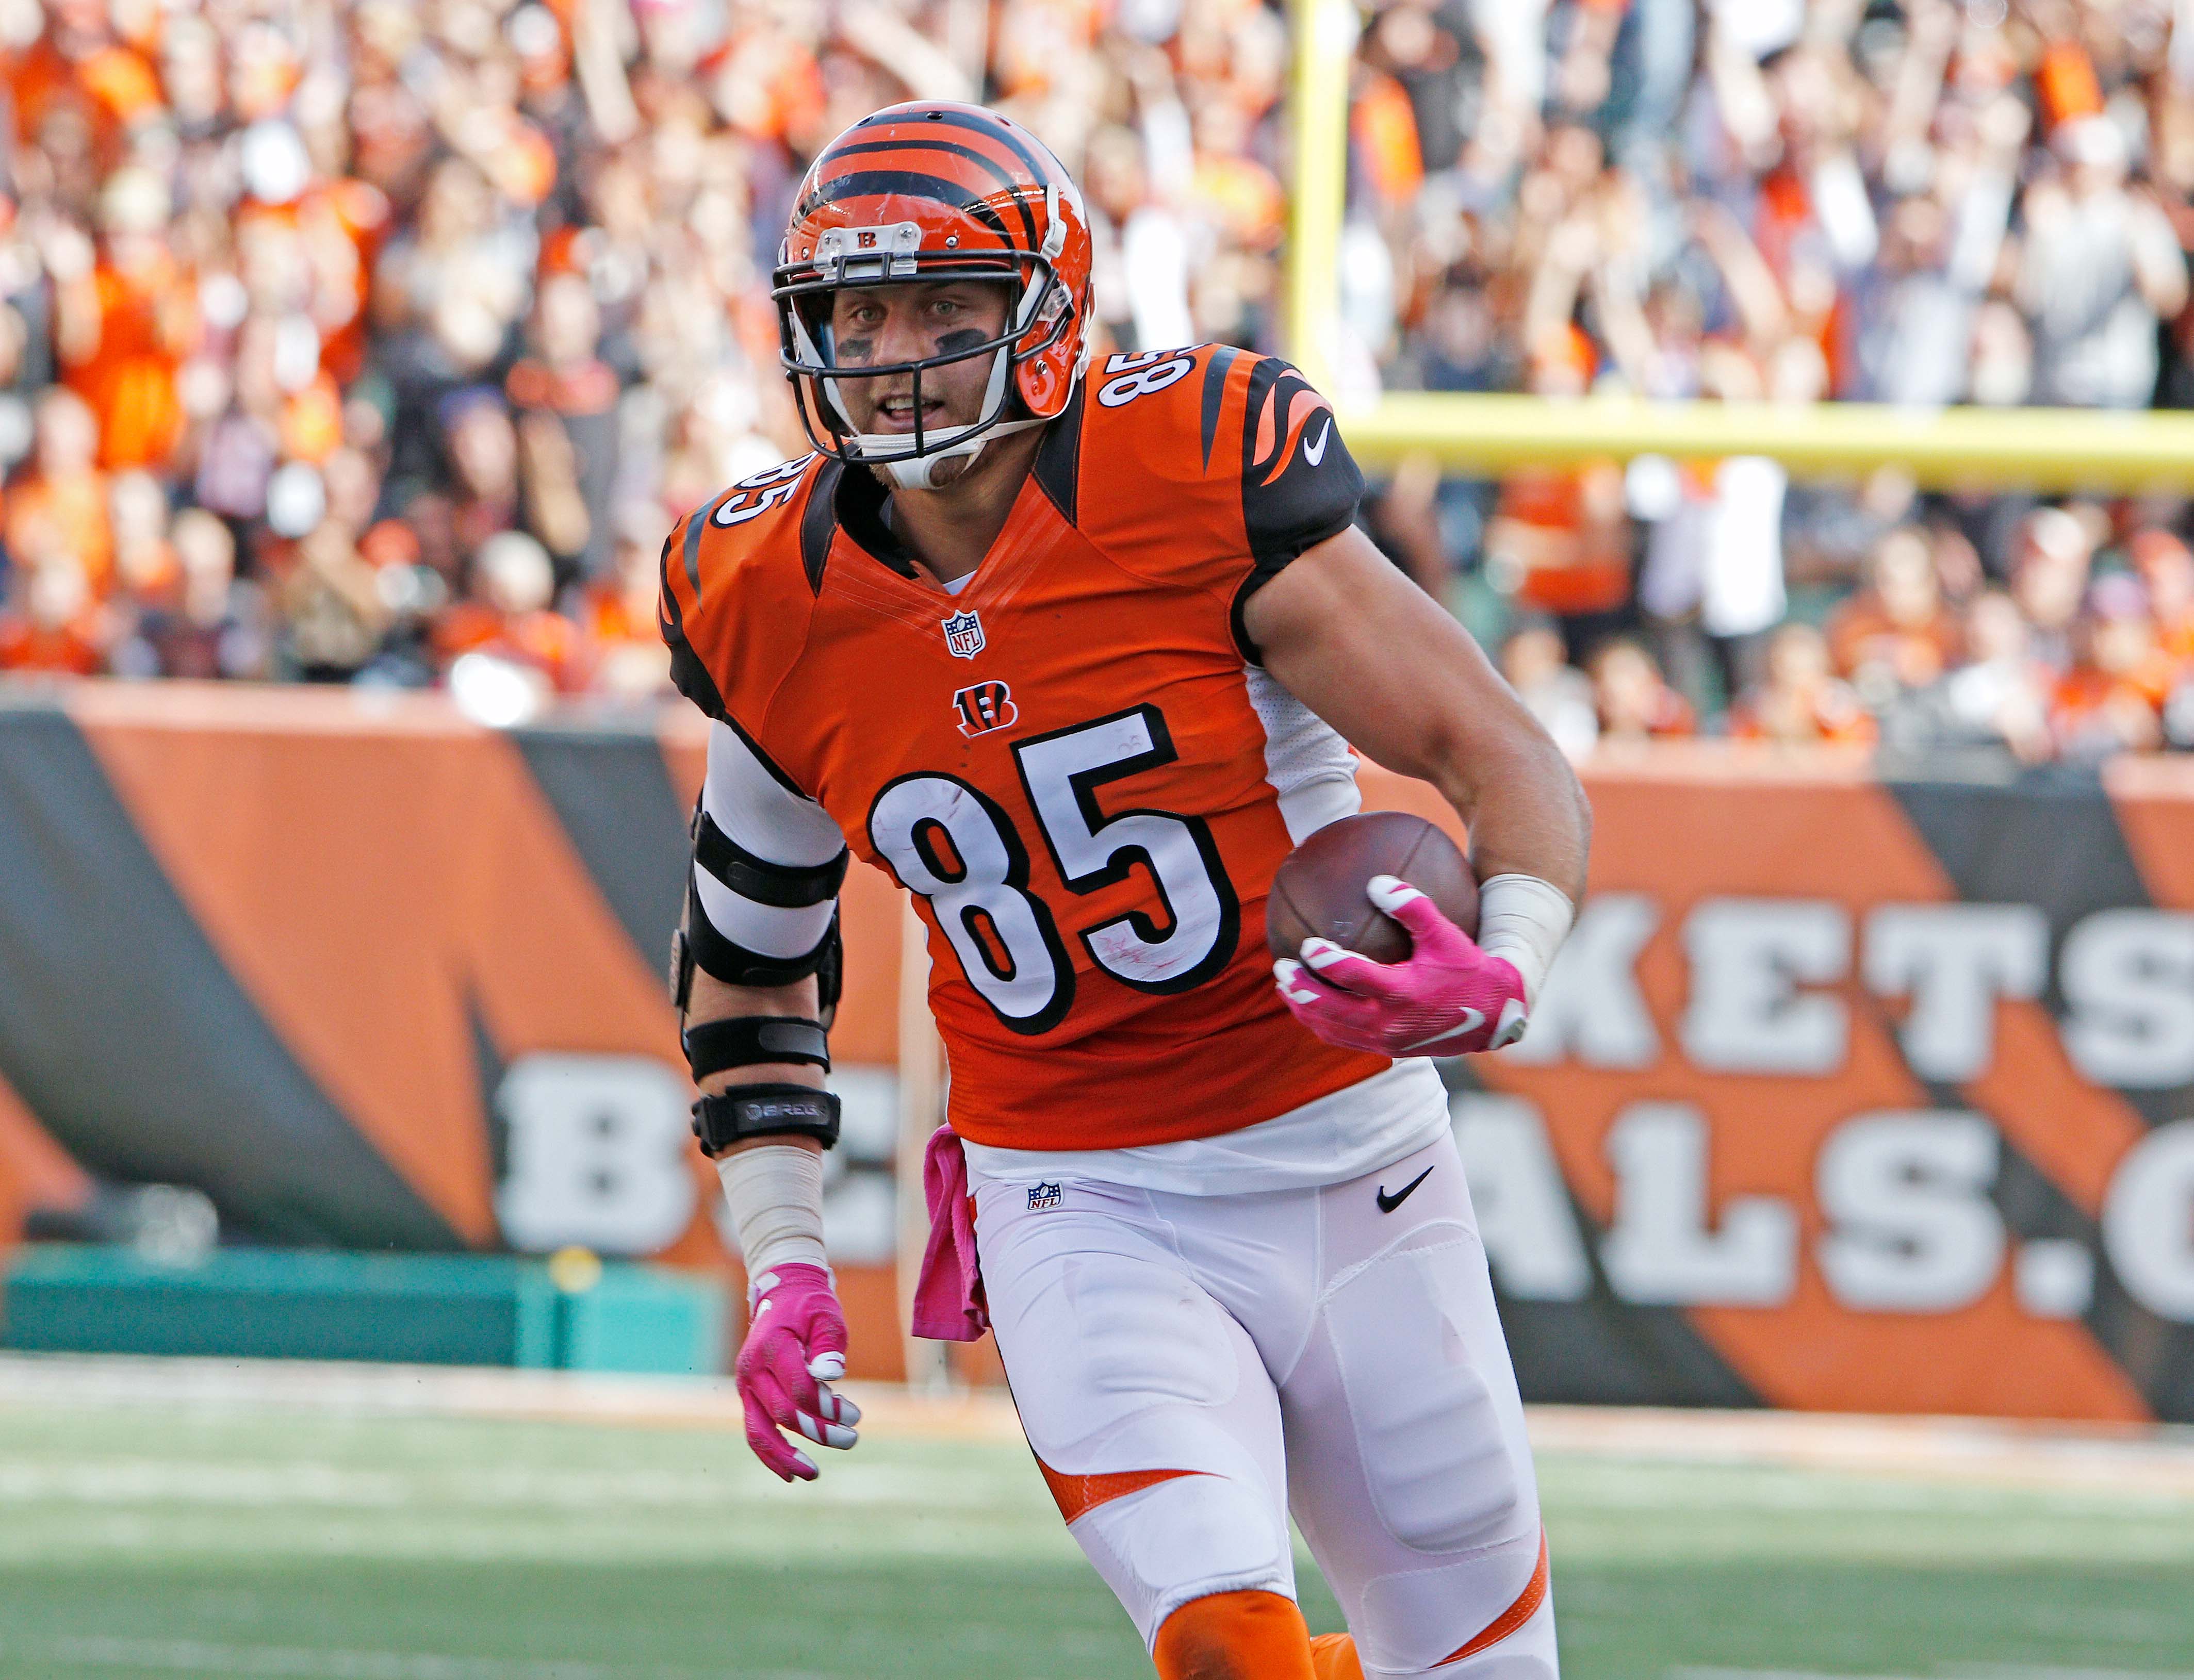 Tyler Eifert has been the most consistent tight end not named Rob Gronkowski.